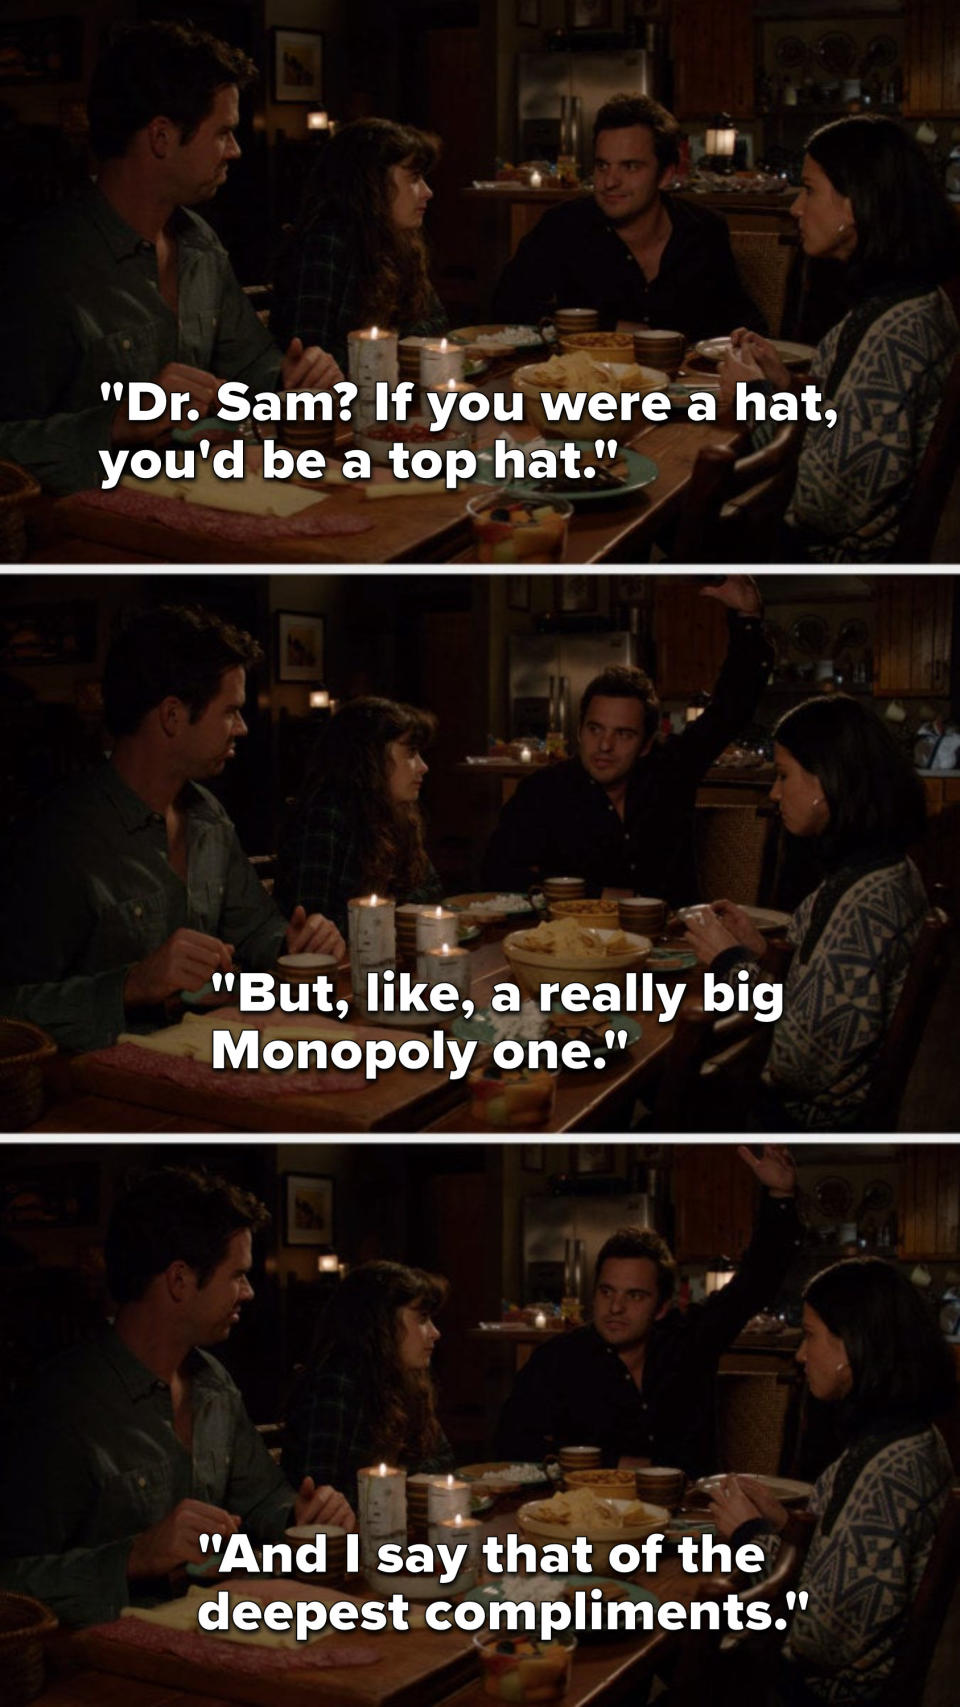 Nick says, Doctor Sam, if you were a hat, you'd be a top hat, but like a really big Monopoly one, and I say that of the deepest compliments